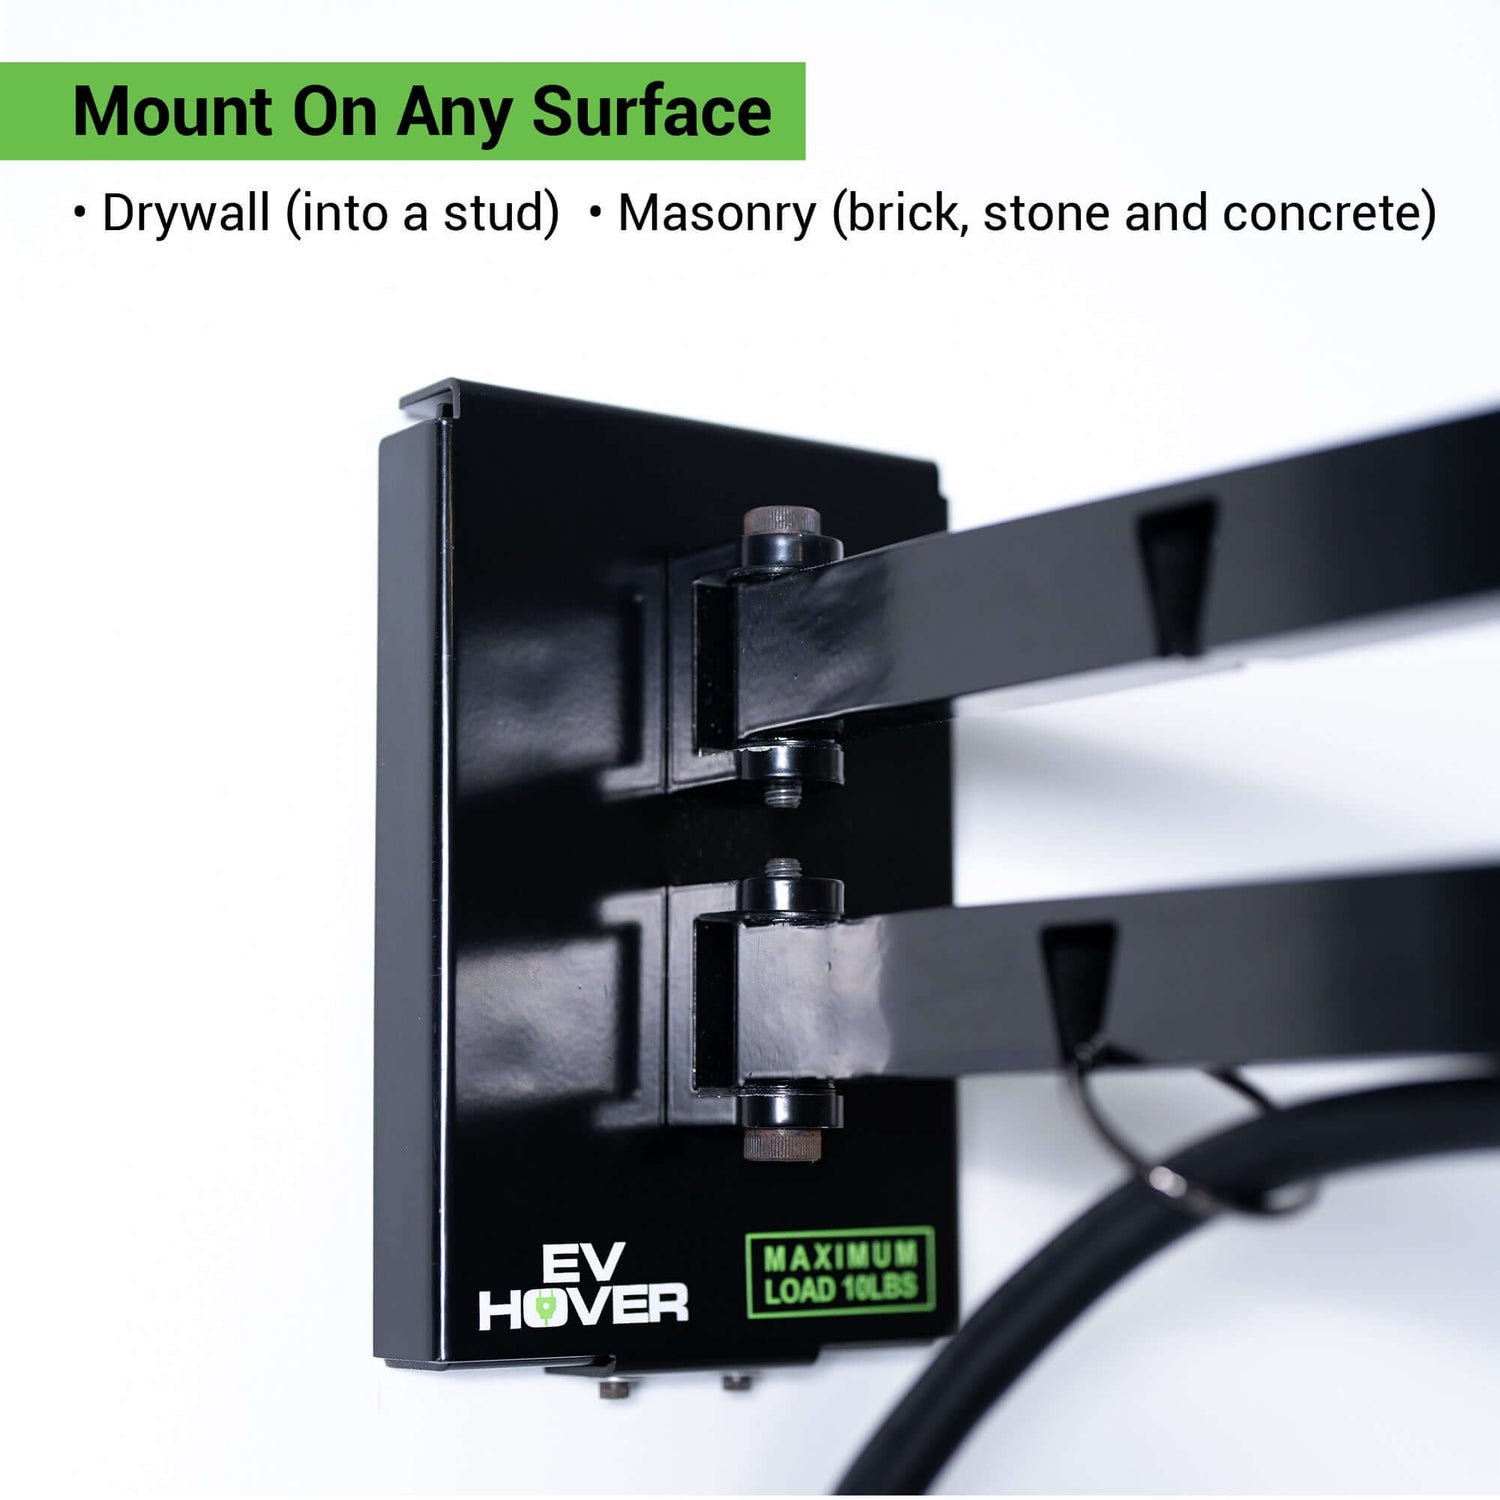 Mount EV Hover on any surface